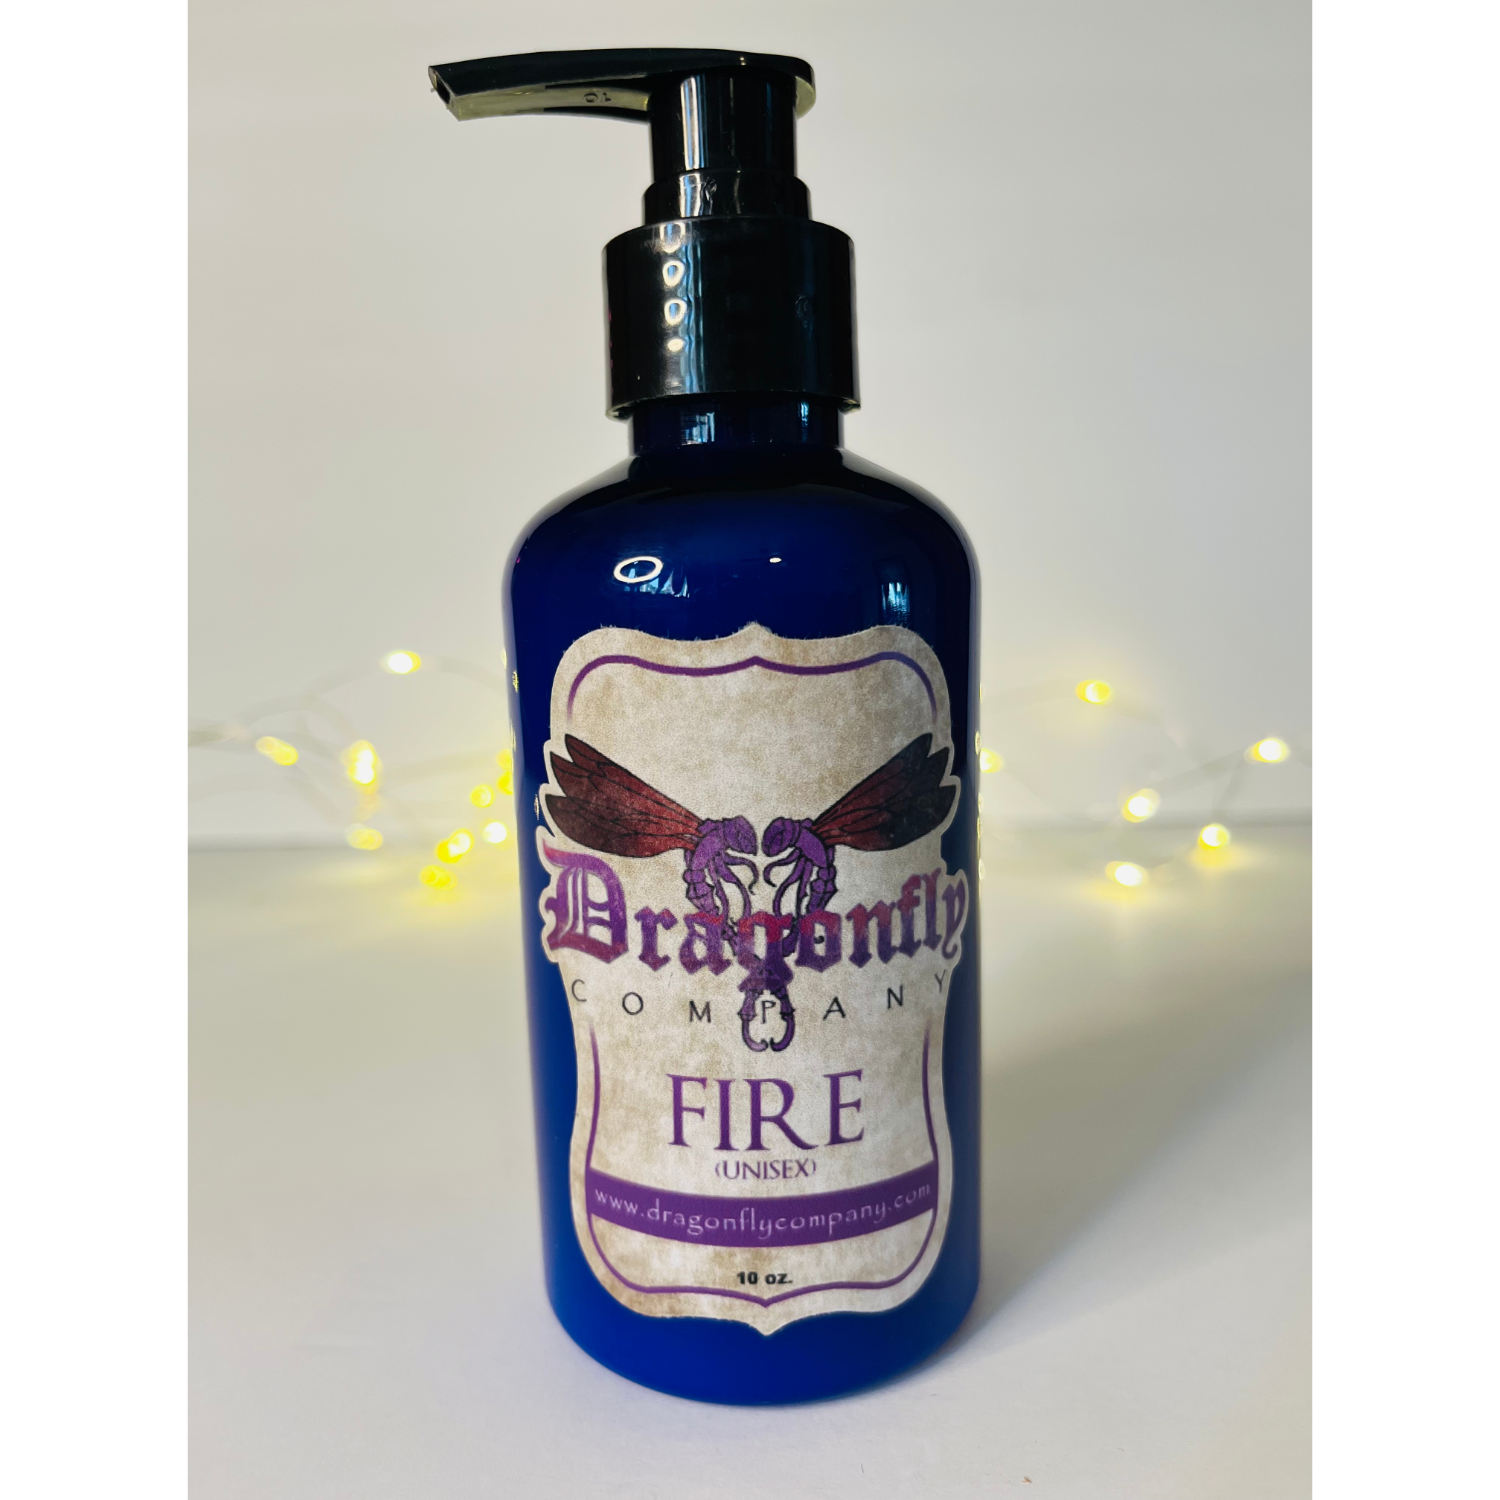 Fire Body Lotion